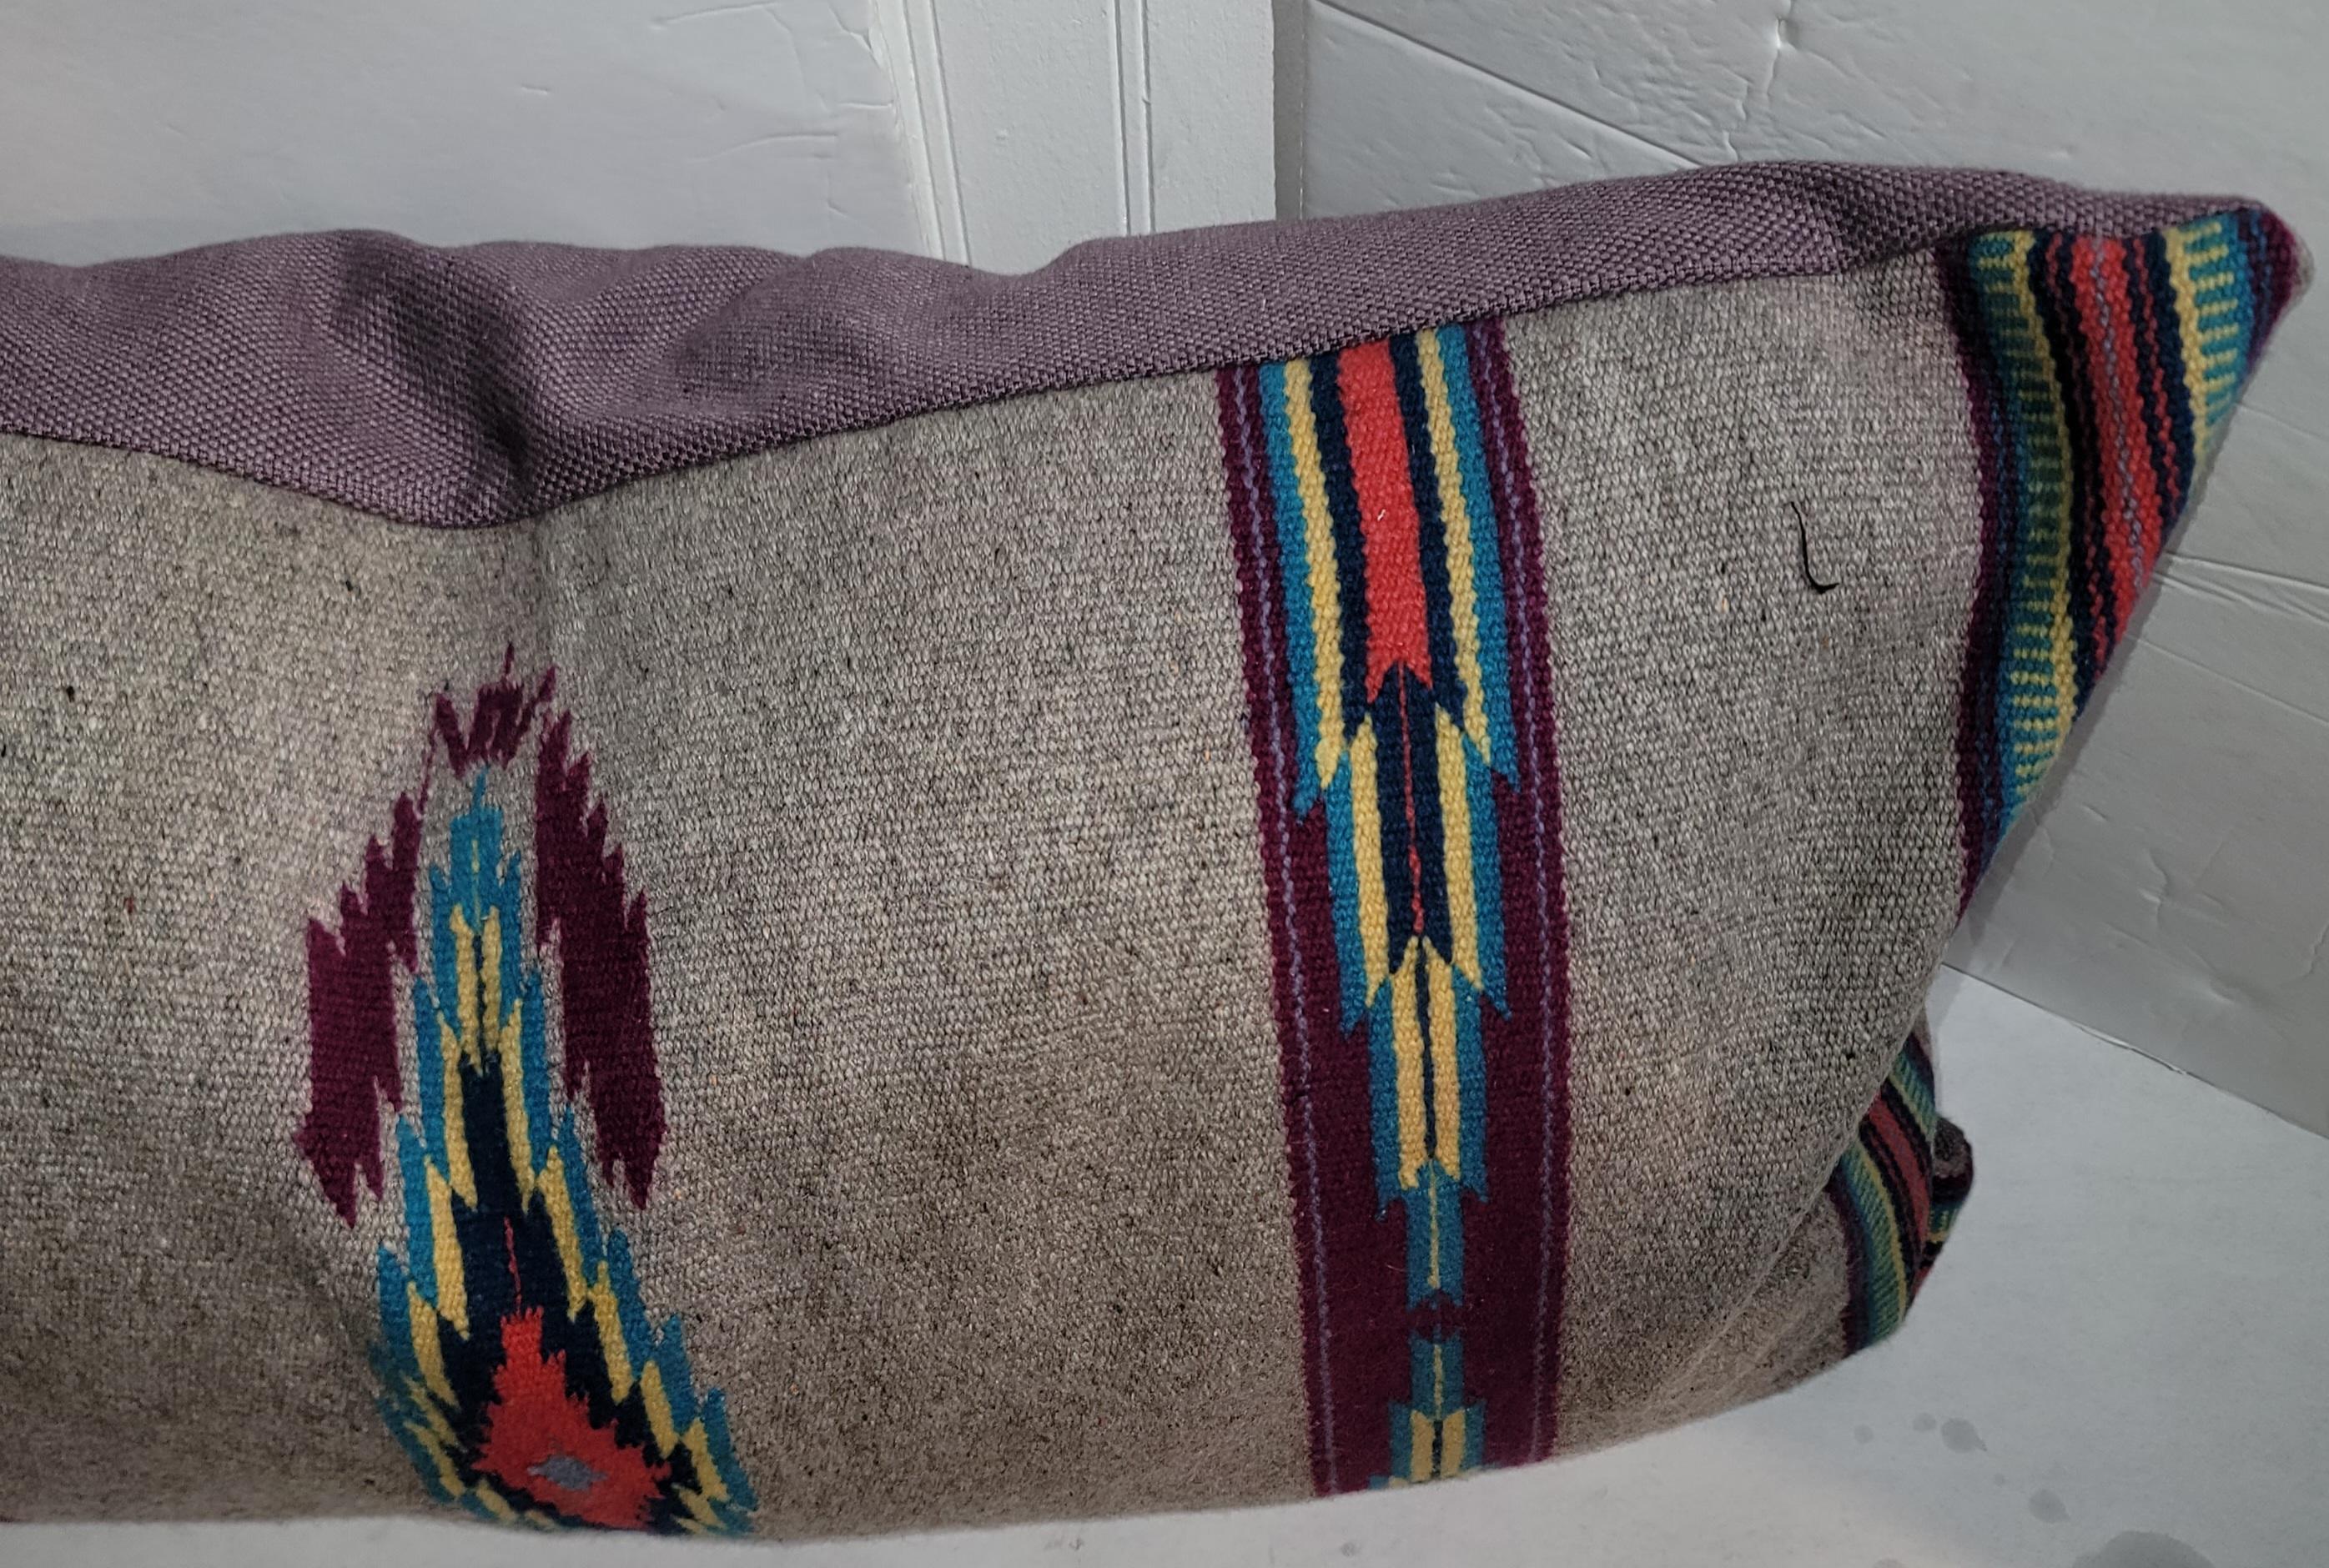 Wool Mexican Serape Bolster Pillow with linen backing. Strong Colors make this pillow stand out. The dark grays are a great use of a background color with deep red and some blues and browns. Fitted with custom made down and feather inserts.